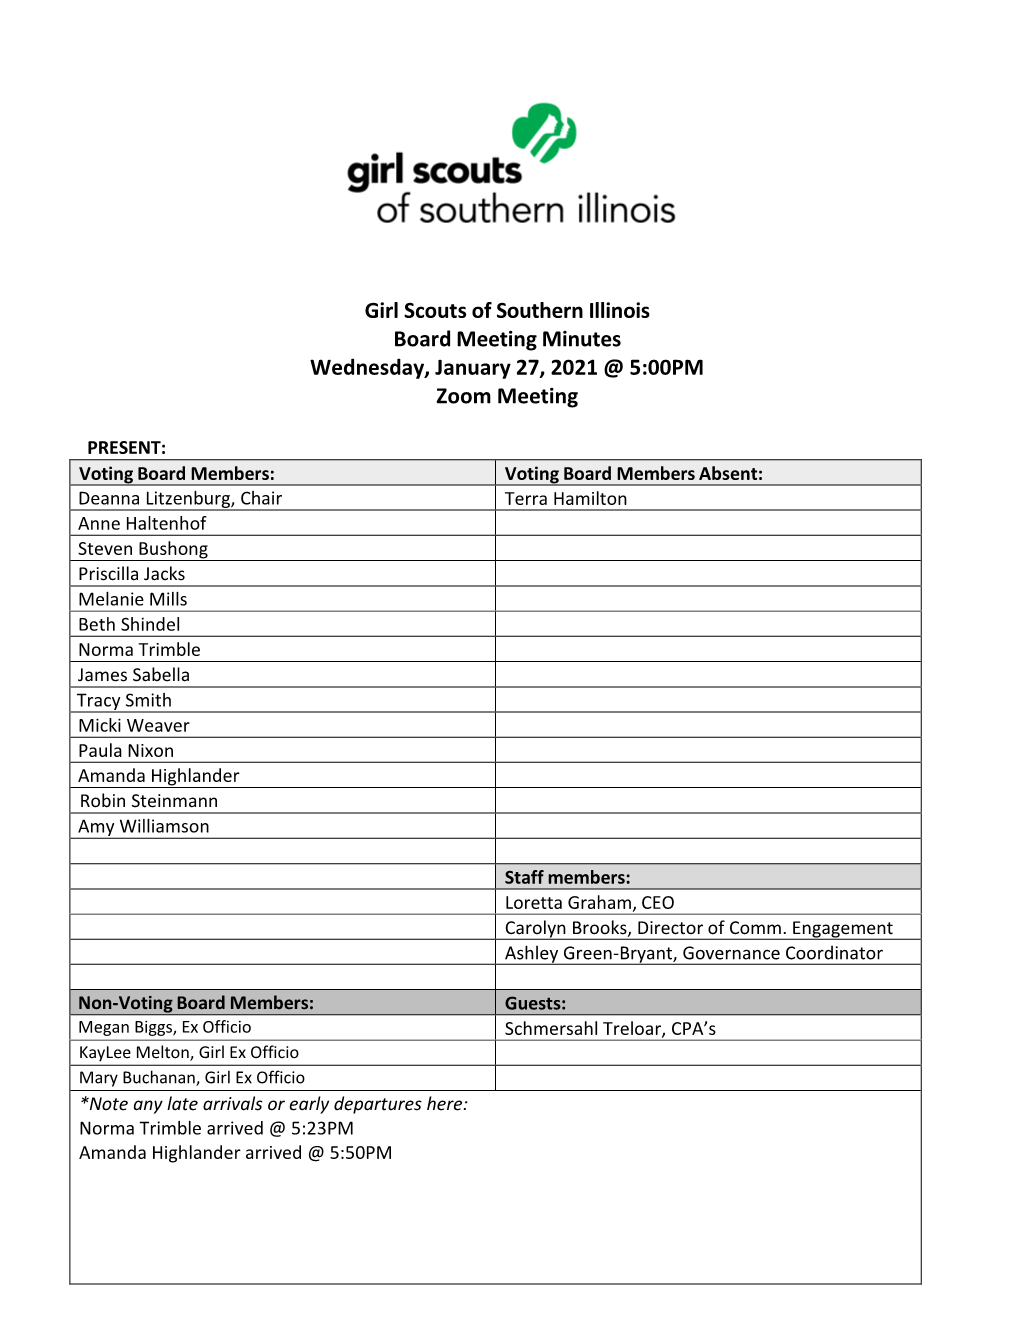 Girl Scouts of Southern Illinois Board Meeting Minutes Wednesday, January 27, 2021 @ 5:00PM Zoom Meeting